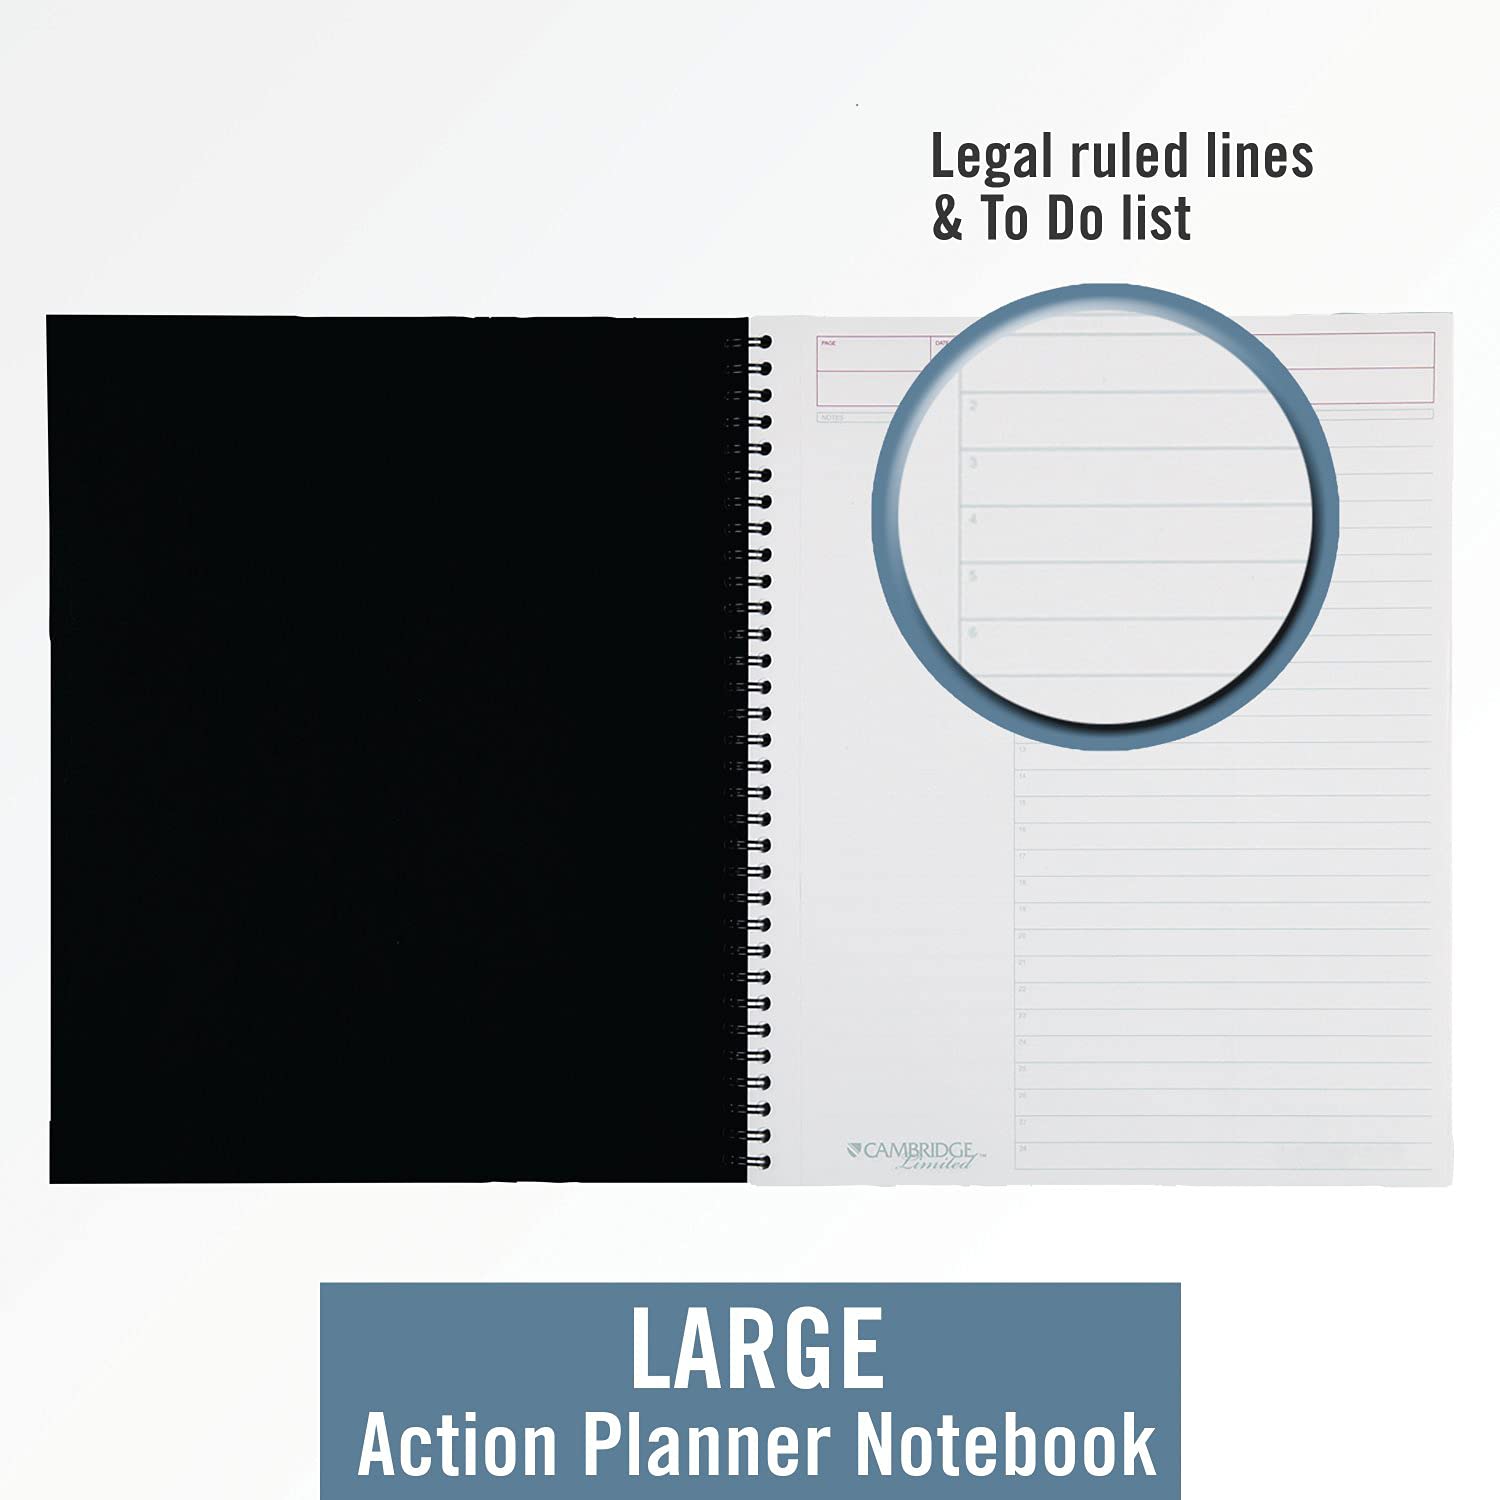 Cambridge Limited Business Notebook, 8-1/4 x 11 Inches, Wirebound, Action Planner, Black (06064)